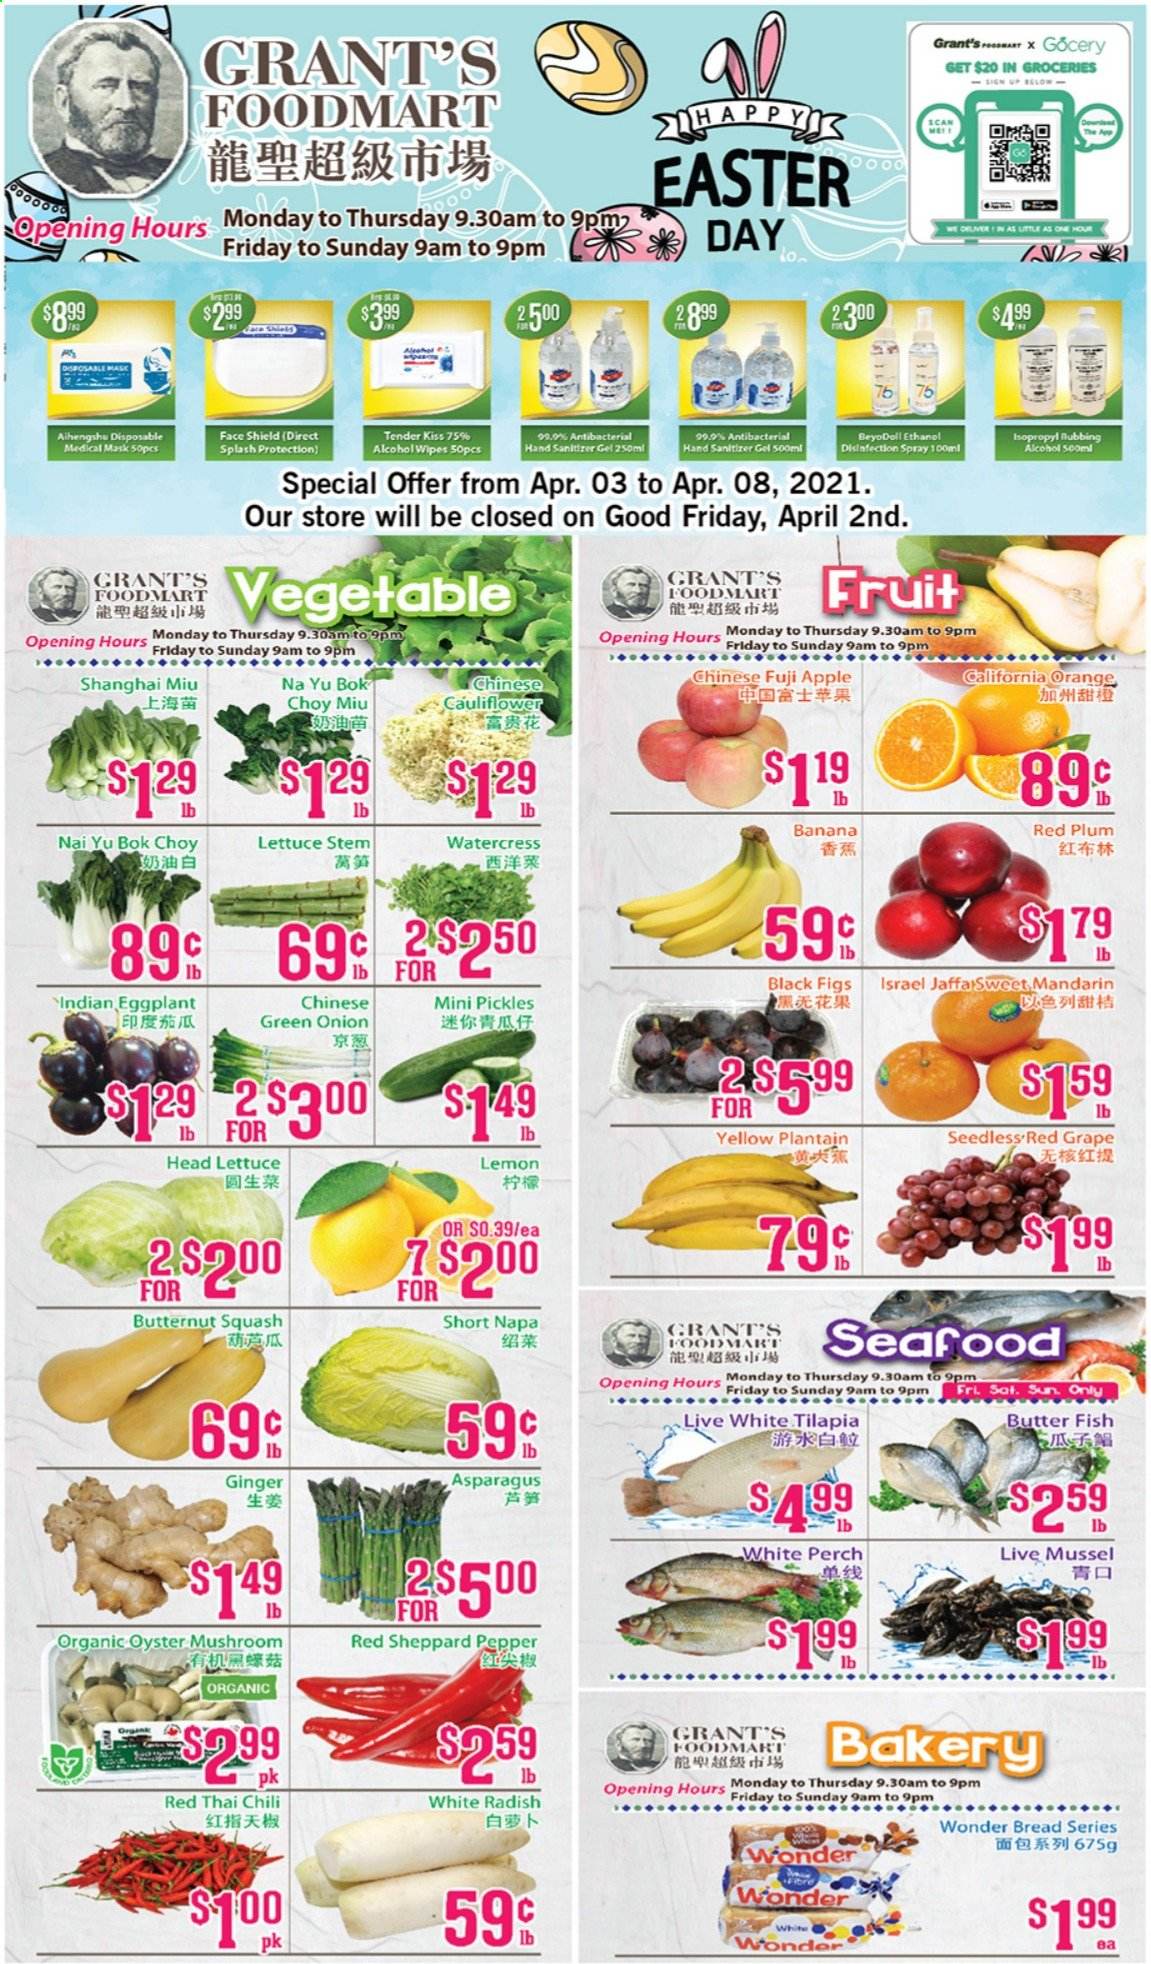 thumbnail - Grant's Foodmart Flyer - April 03, 2021 - April 08, 2021 - Sales products - oyster mushrooms, mushrooms, bread, asparagus, bok choy, butternut squash, ginger, radishes, onion, lettuce, eggplant, white radish, green onion, figs, mandarines, Fuji apple, red plums, mussels, tilapia, perch, oysters, fish, pickles, watercress, pepper, Grant's, wipes, hand sanitizer. Page 1.